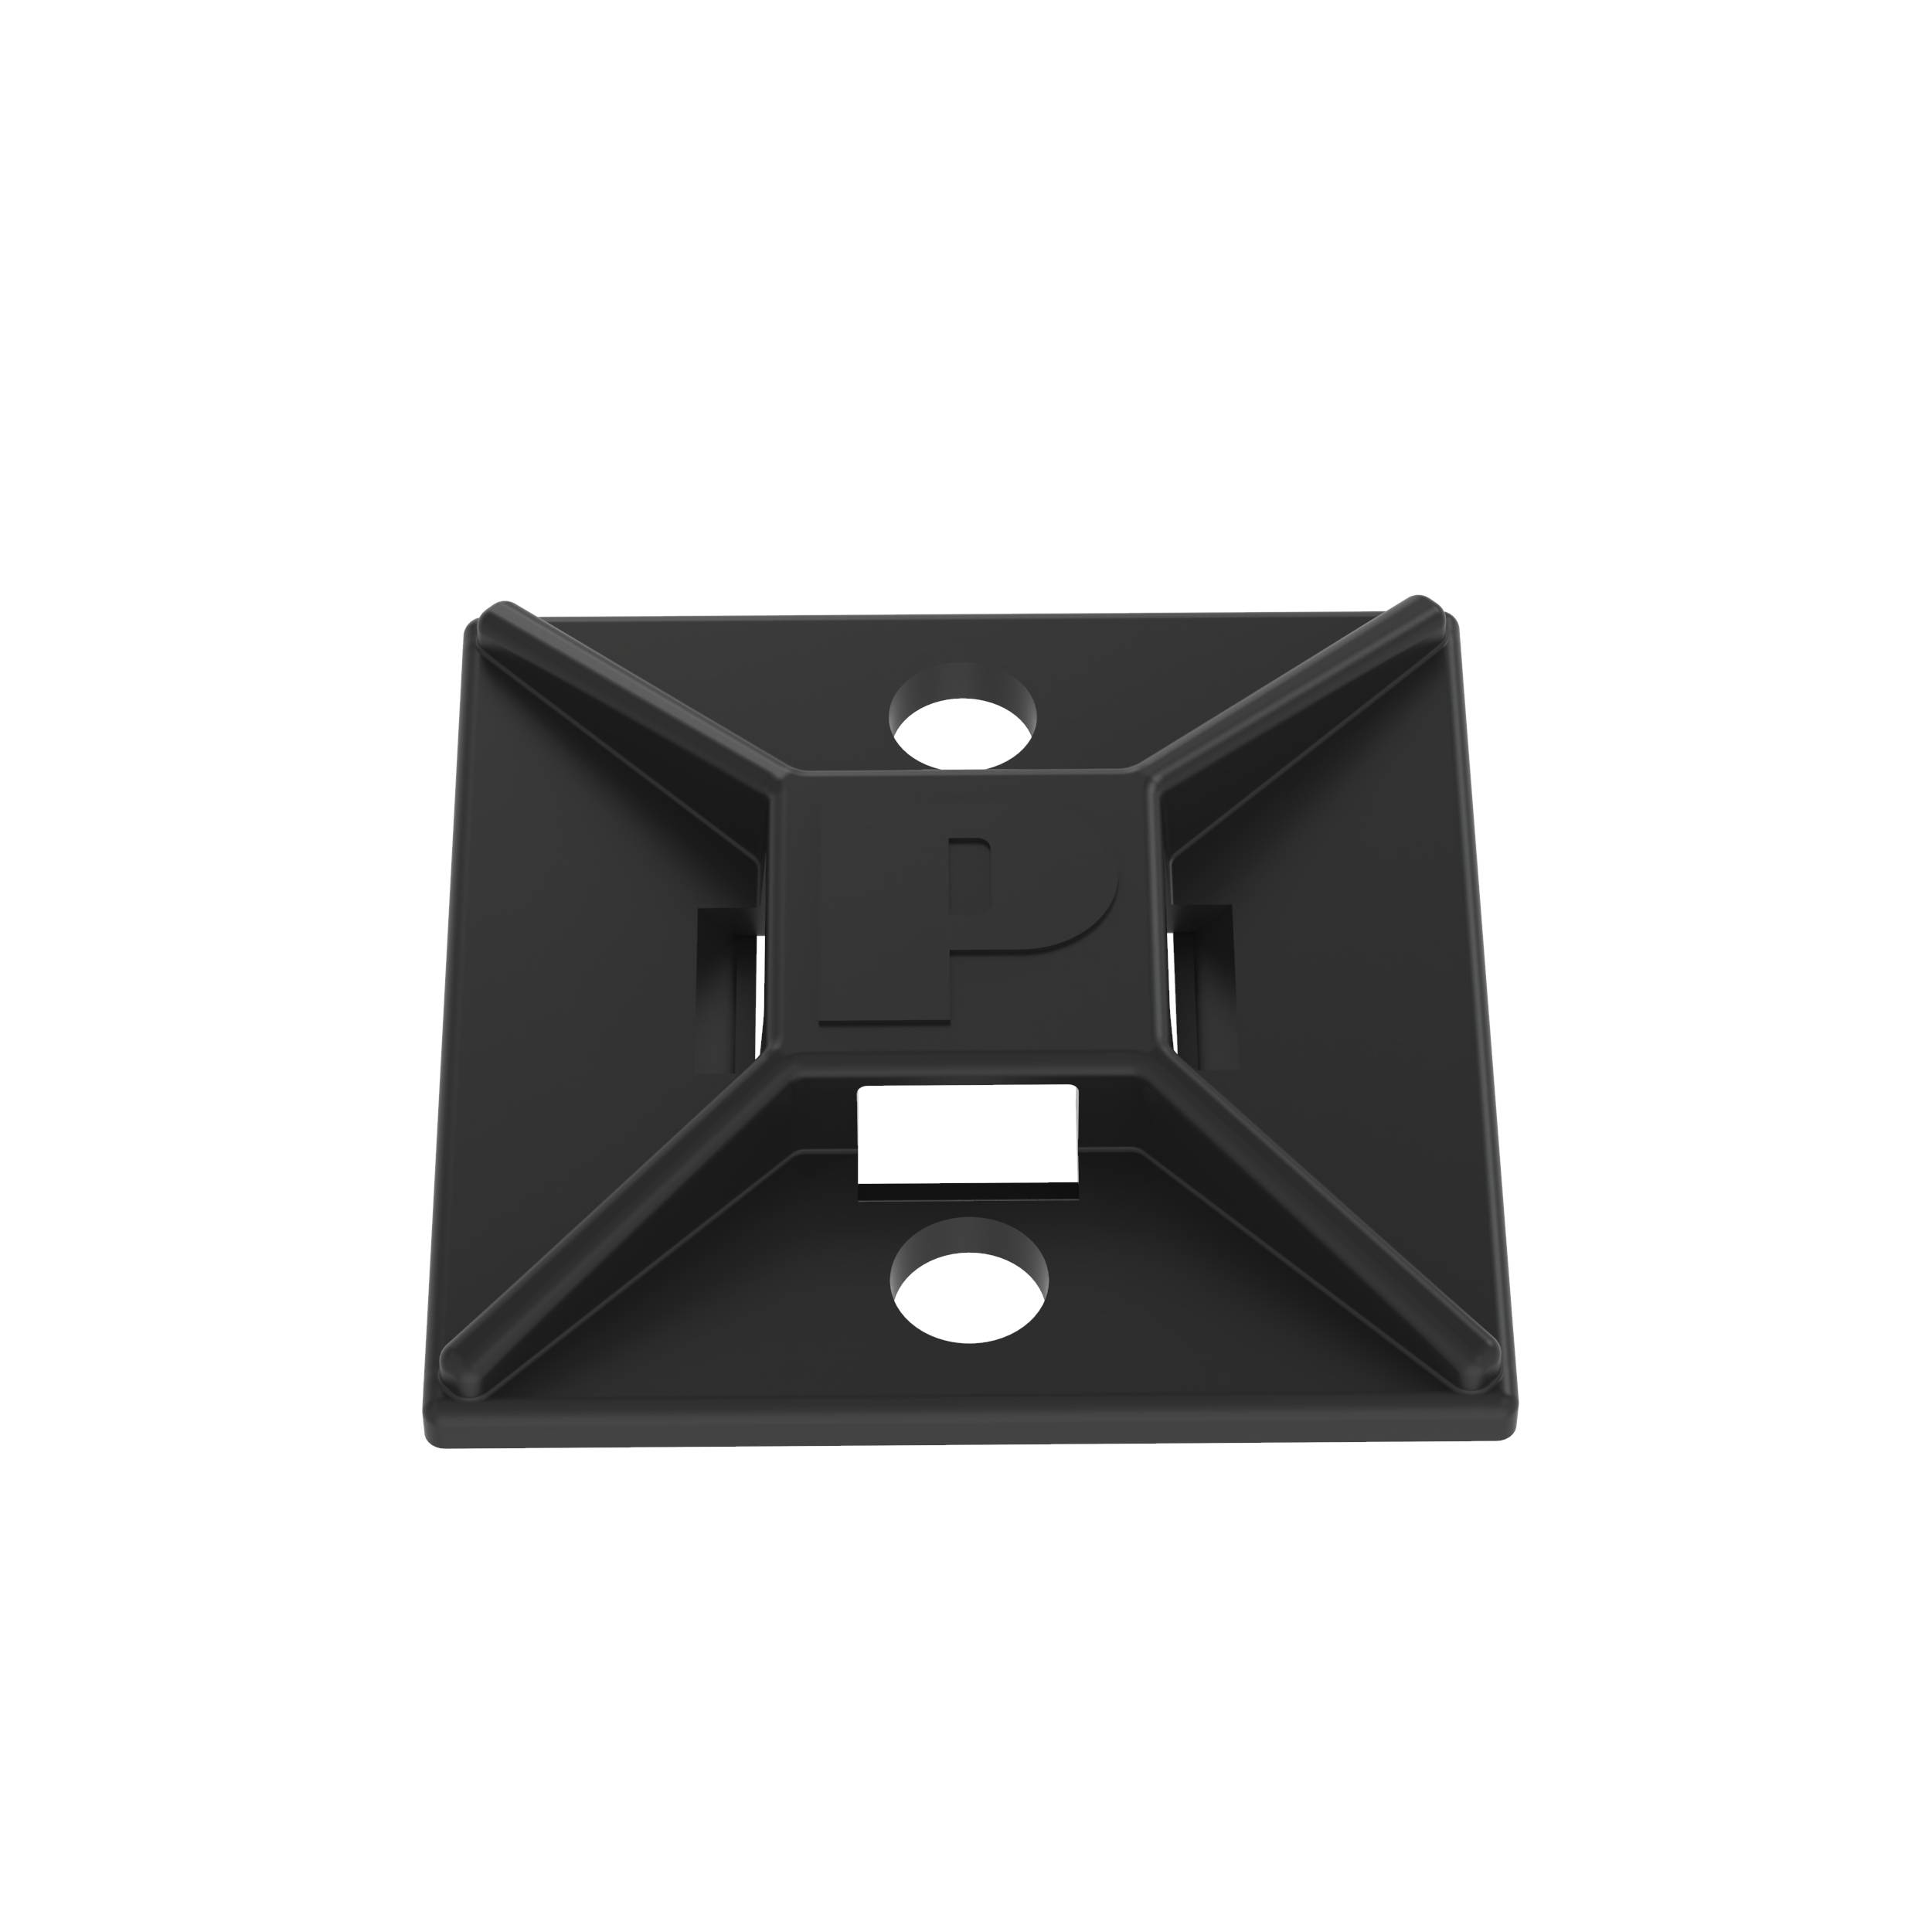 Panduit® ABM112-AT-D0 Weather-Resistant Cable Tie Mount, 4-Way, Acrylic Adhesive Tape Mount, 0.19 in W Tie, Nylon 6.6, Black